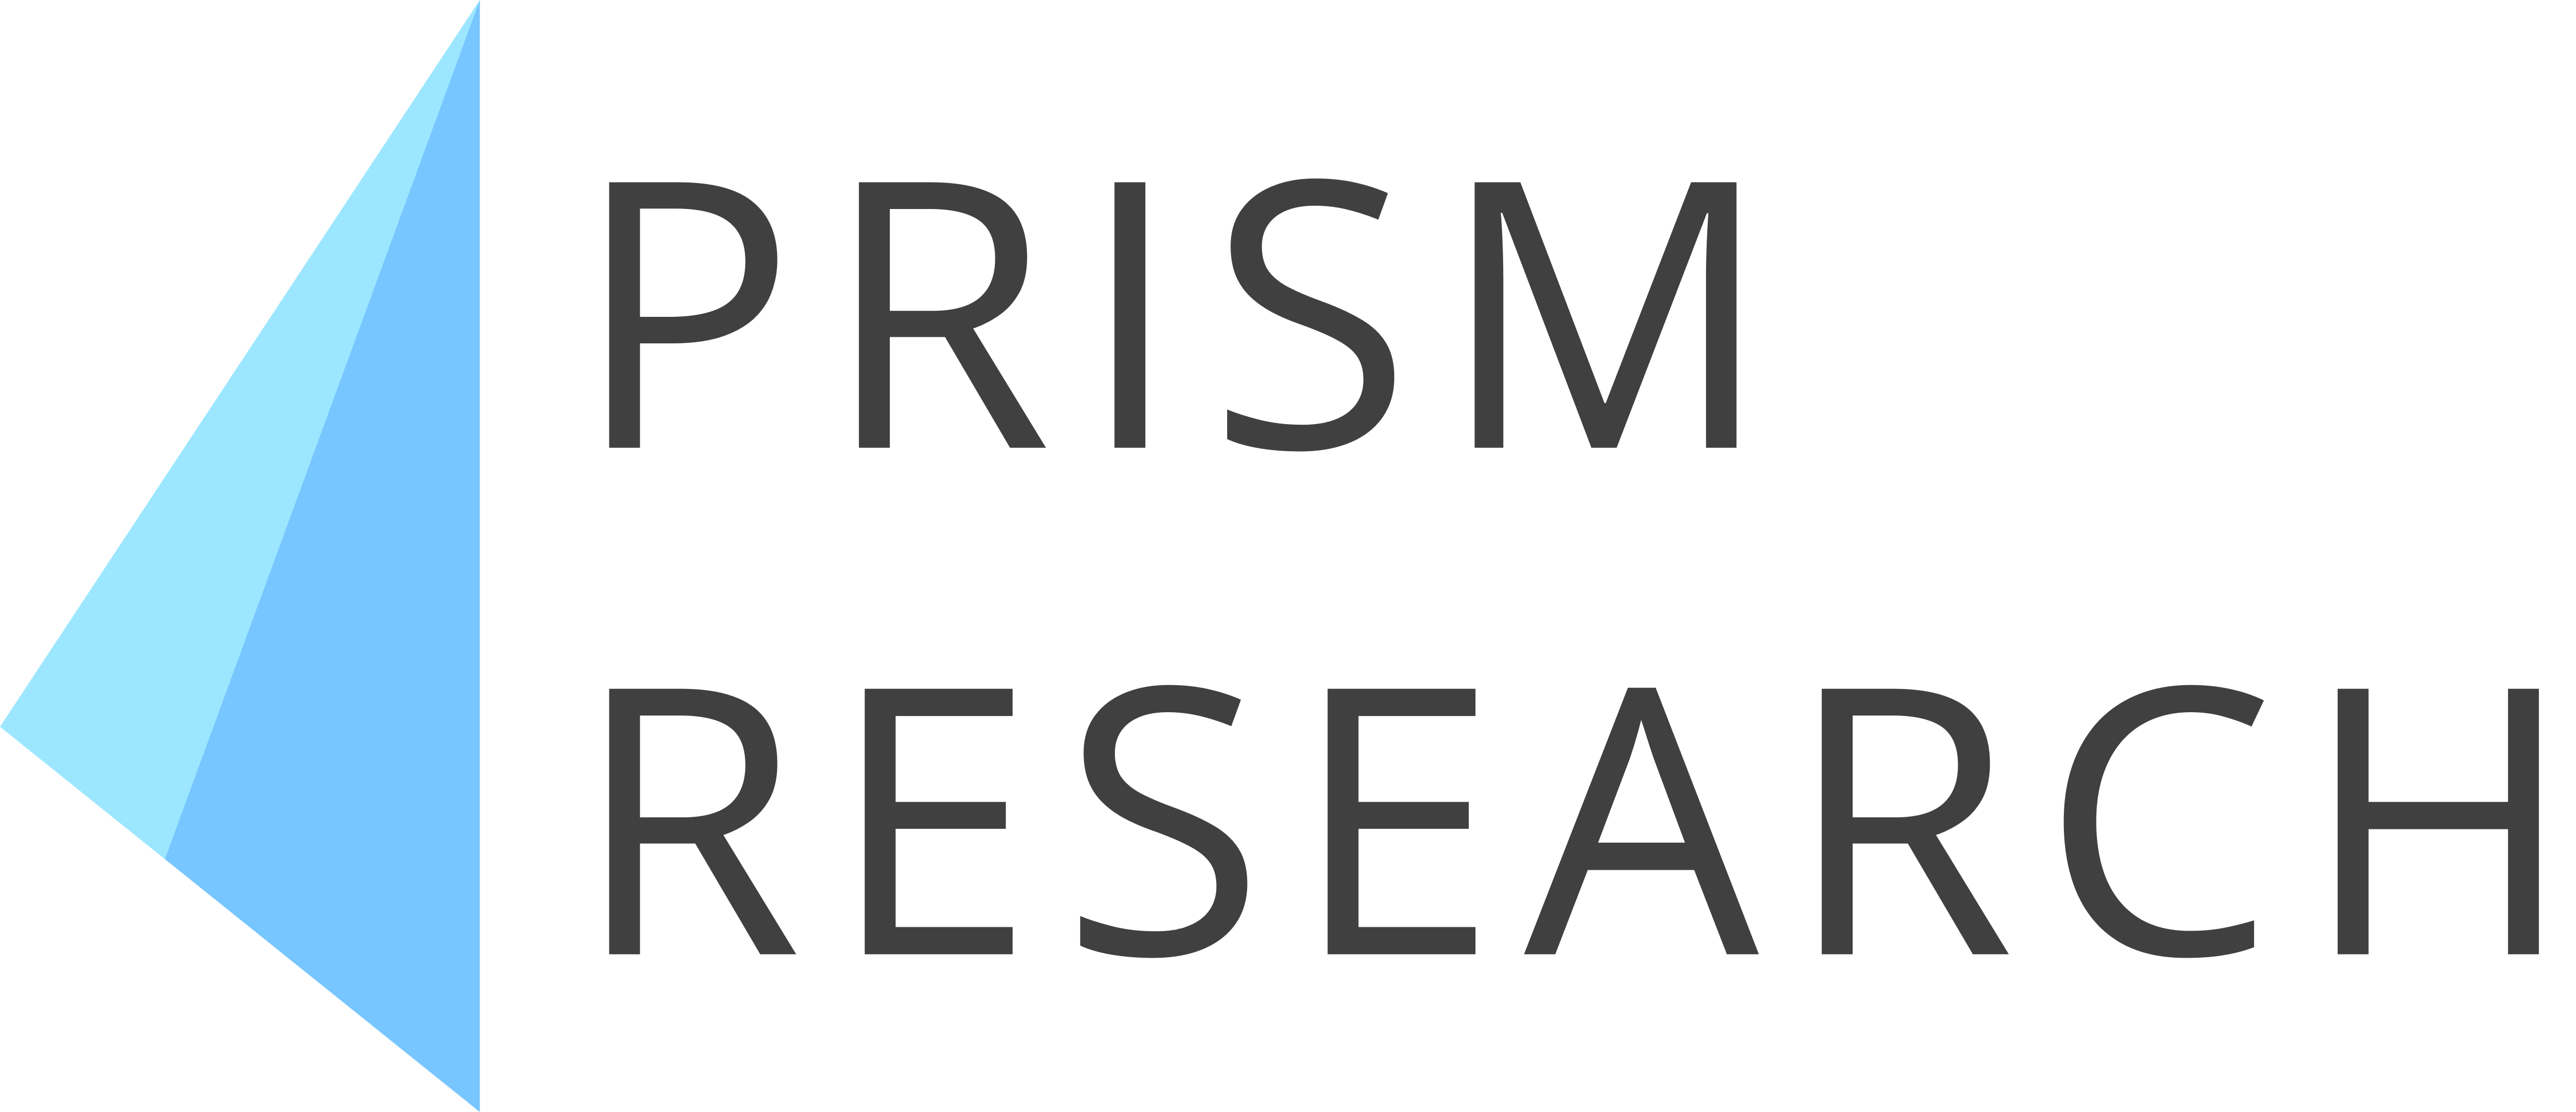 Prism Research